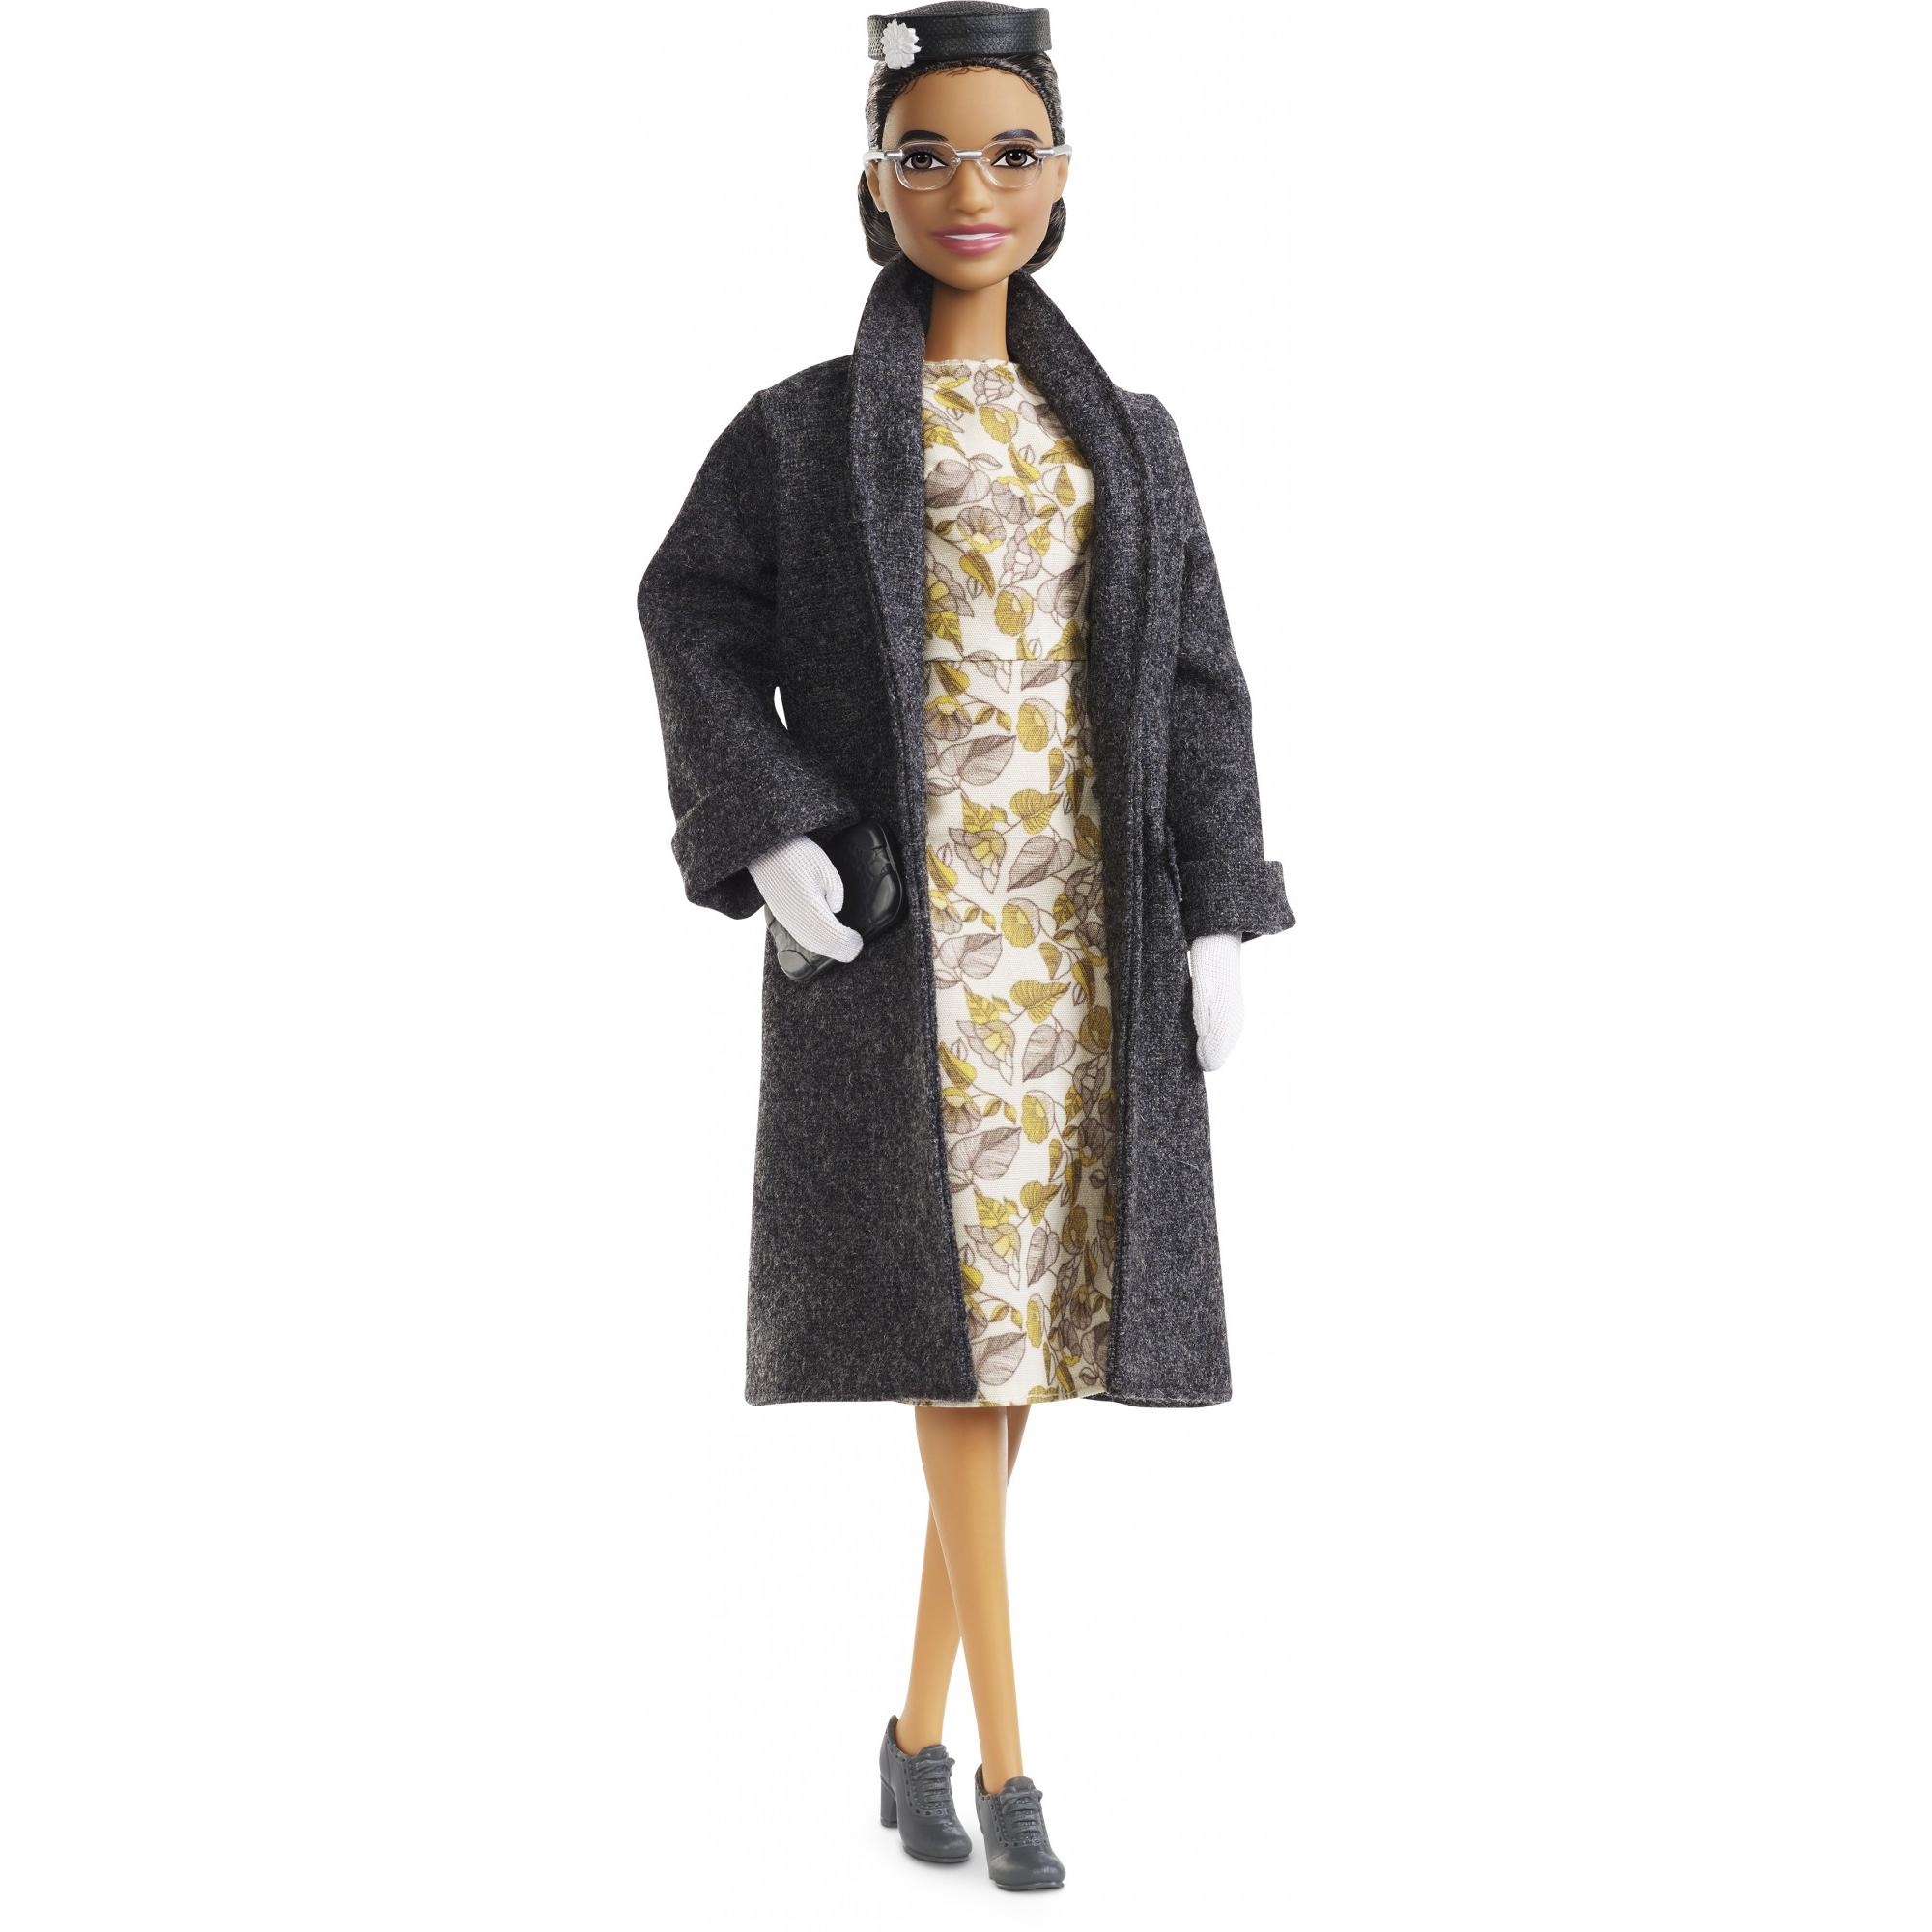 Barbie Inspiring Women Rosa Parks Doll with Accessories